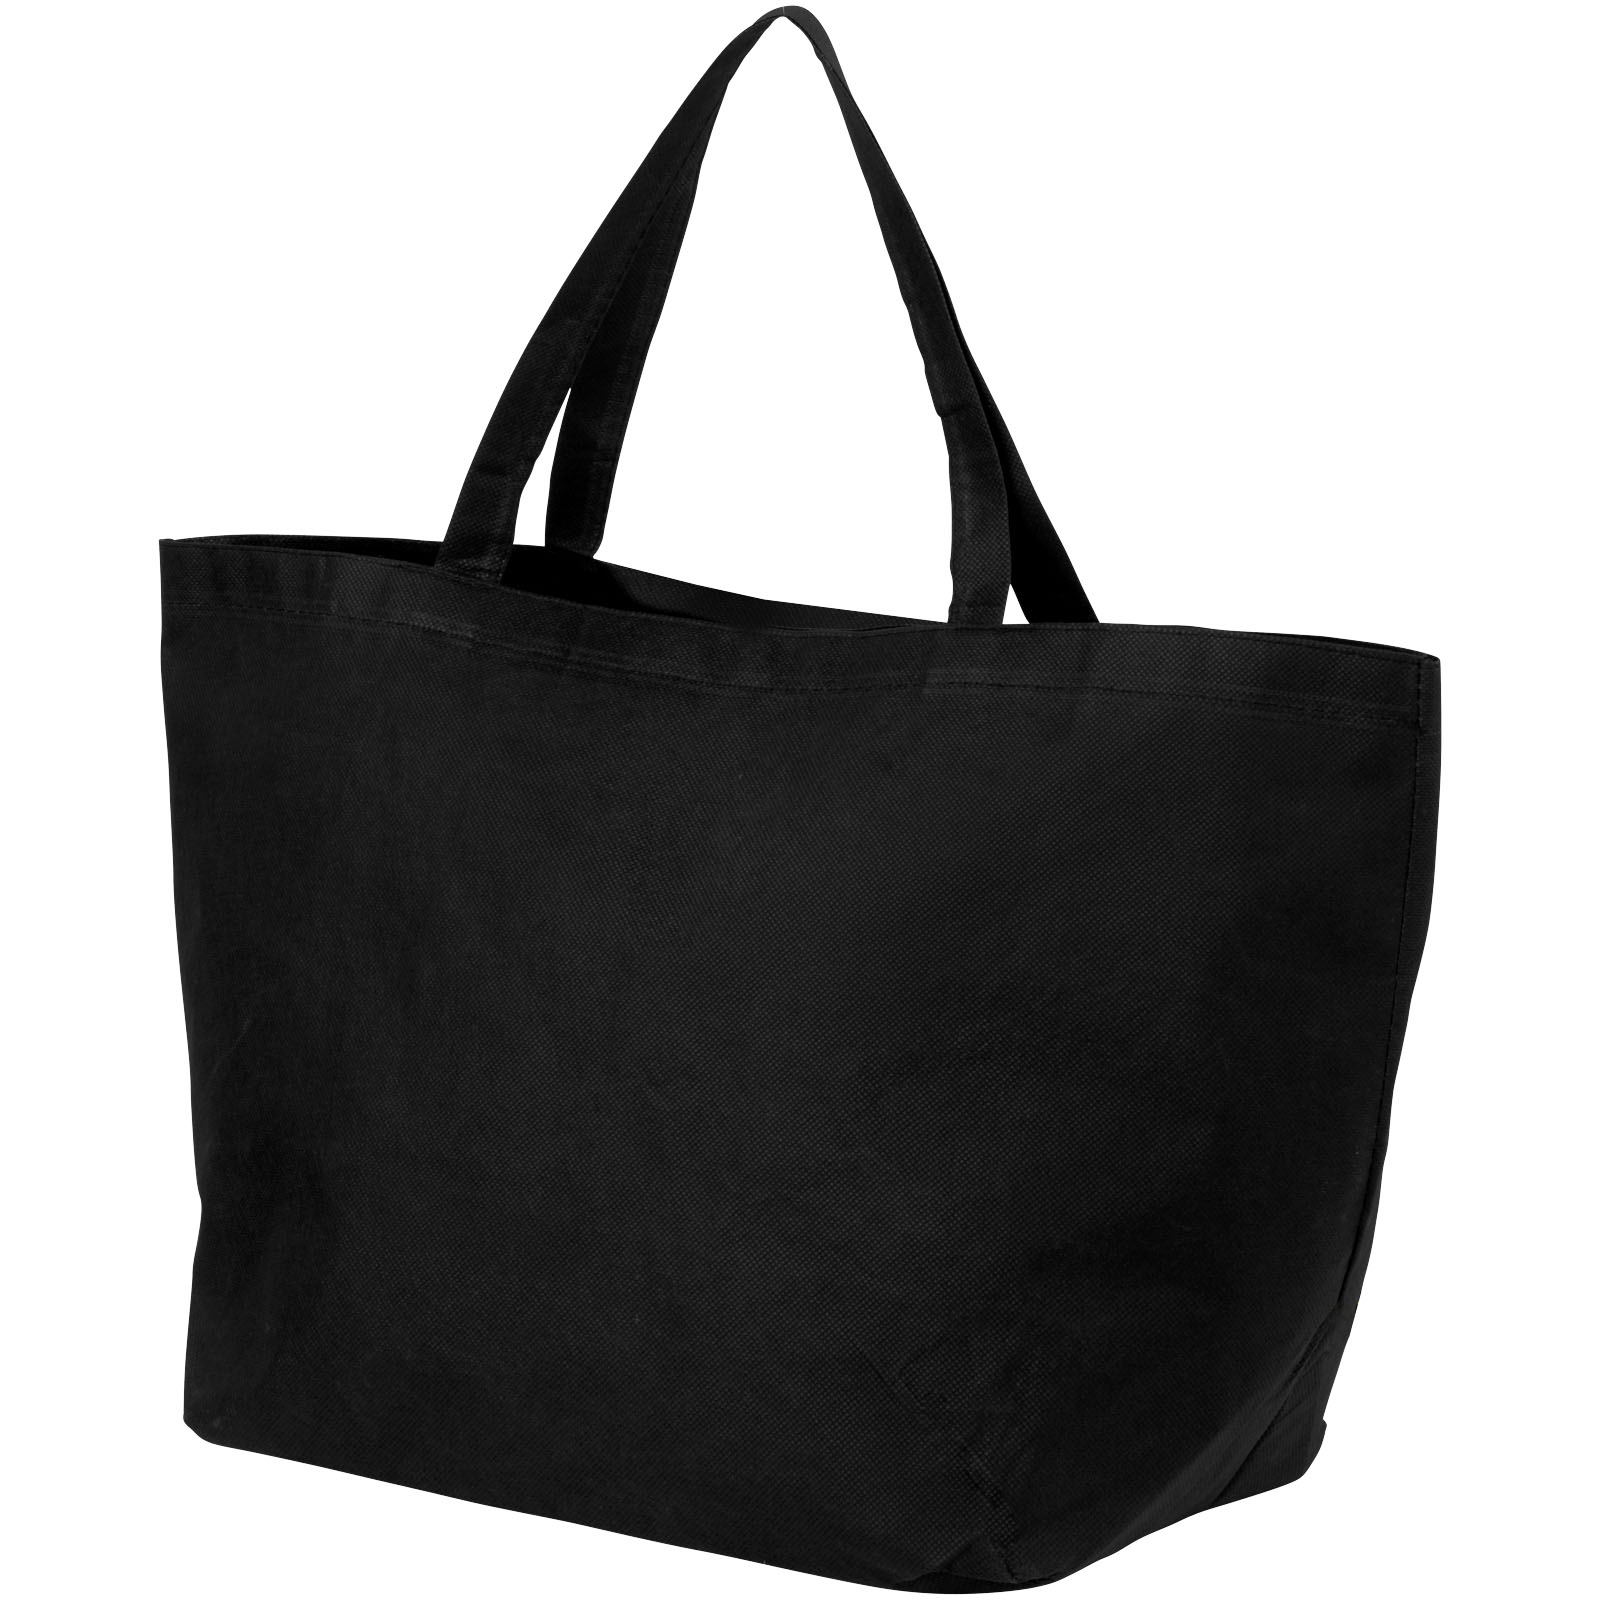 Shopping & Tote Bags - Maryville non-woven shopping tote bag 28L